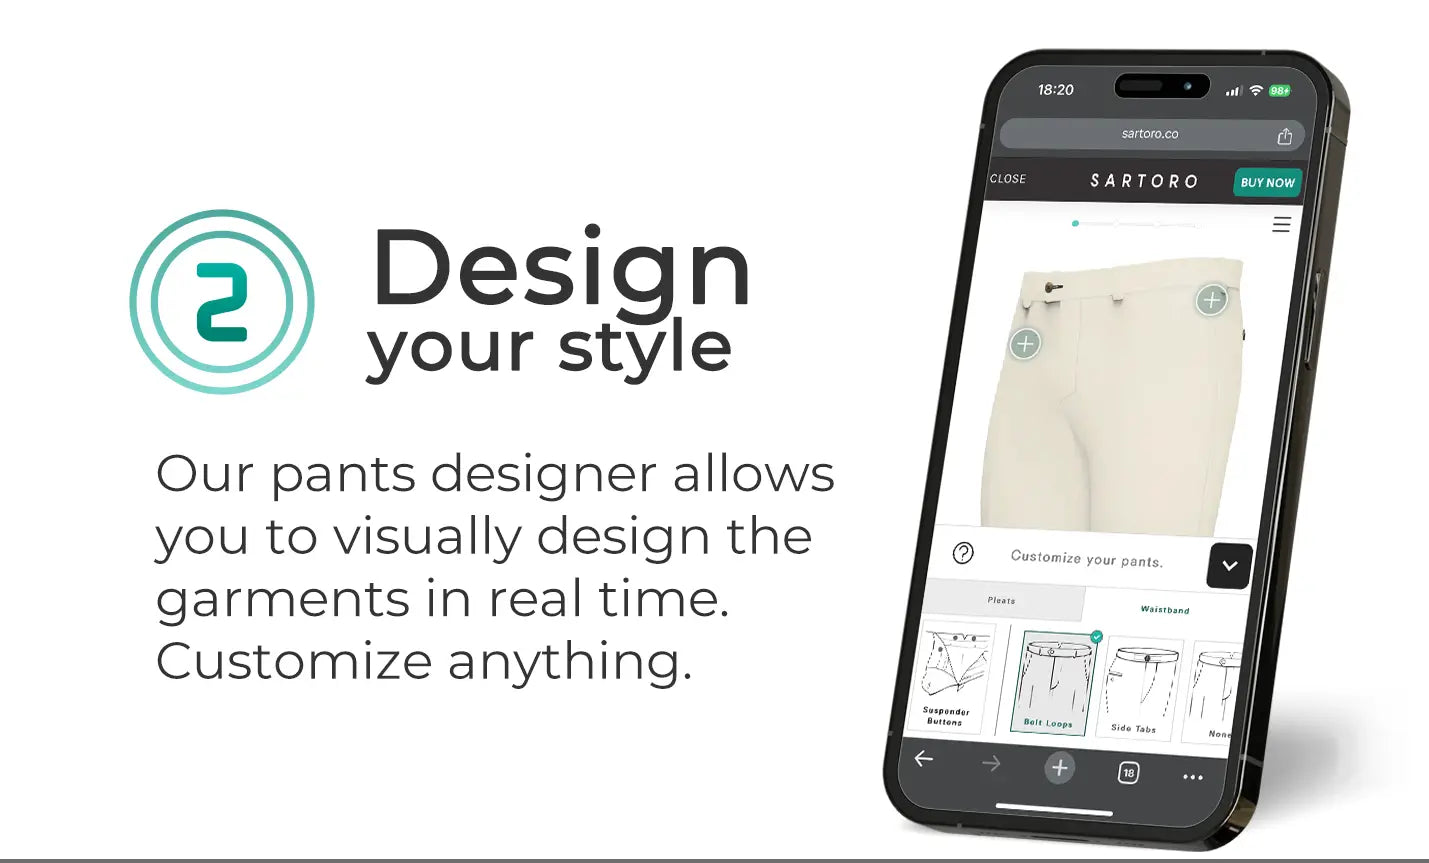 Design your style with our pants designer, designing the garments in real time.